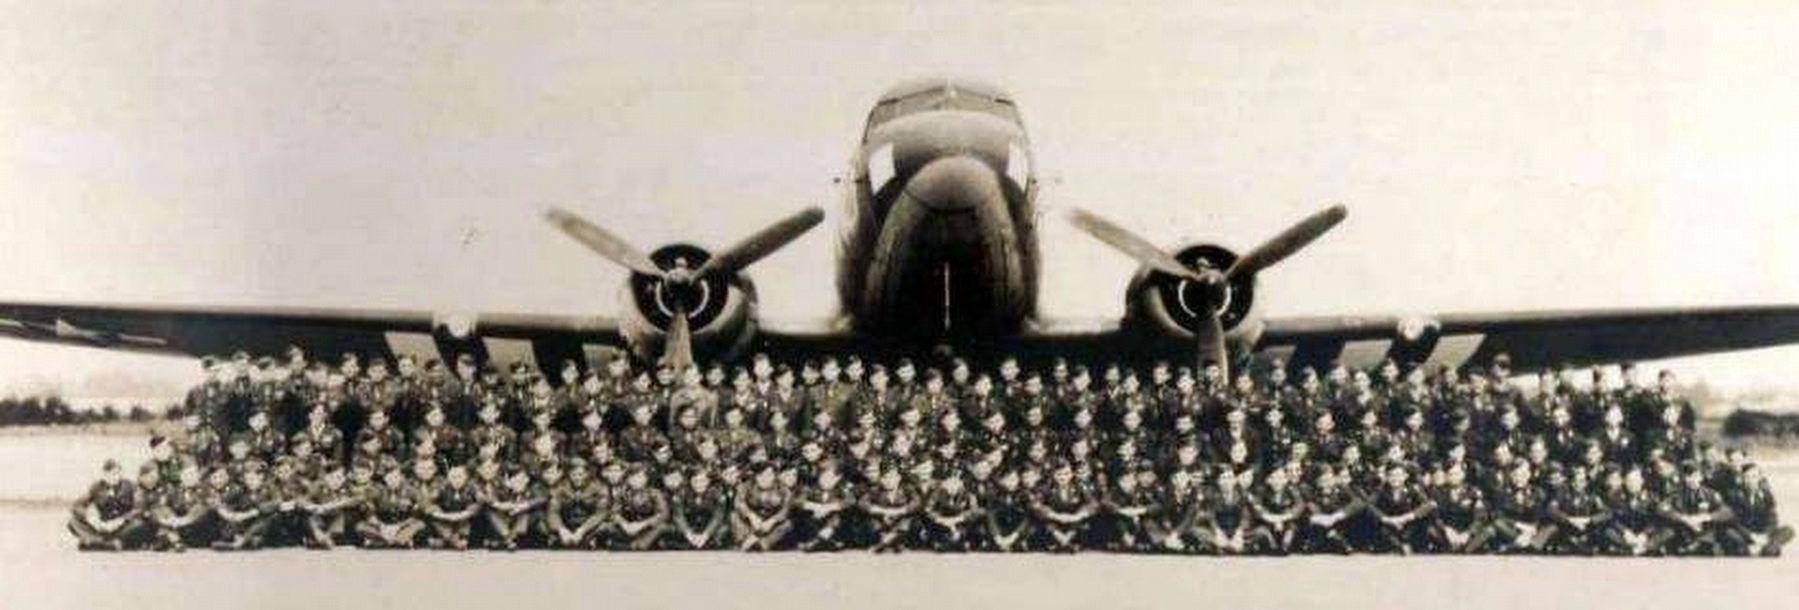 C-47 Skytrain and personnel of 47th Troop Carrier Squadron, 313 TCG, 52 TCW, 9AF image. Click for full size.